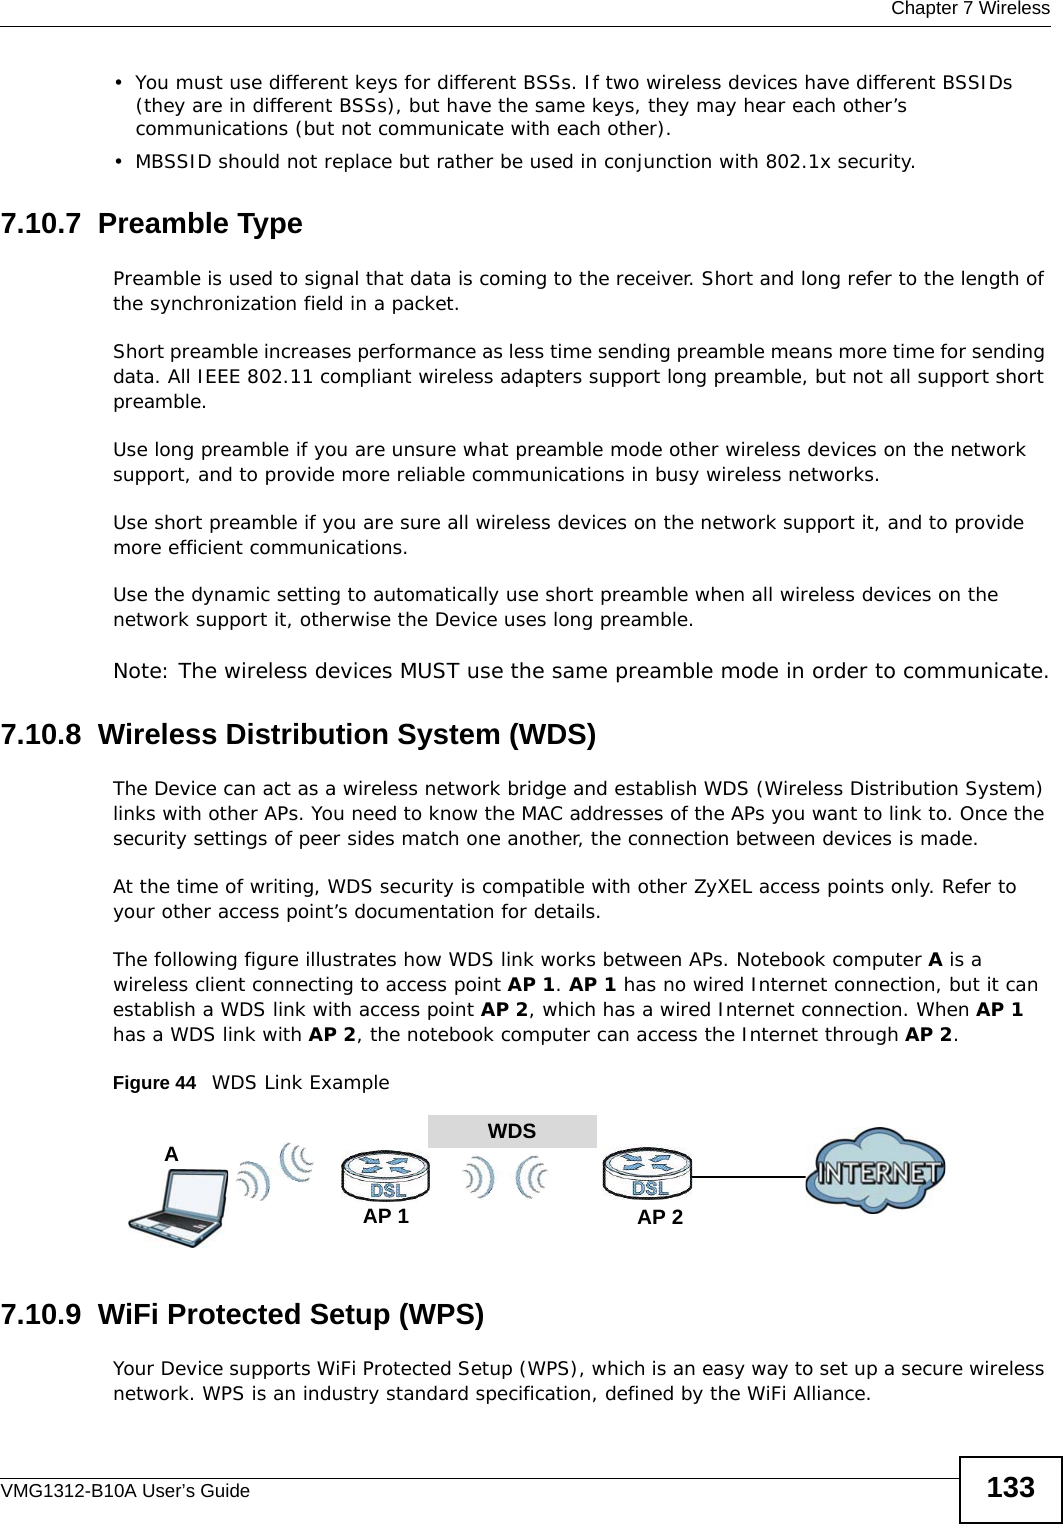  Chapter 7 WirelessVMG1312-B10A User’s Guide 133• You must use different keys for different BSSs. If two wireless devices have different BSSIDs (they are in different BSSs), but have the same keys, they may hear each other’s communications (but not communicate with each other).• MBSSID should not replace but rather be used in conjunction with 802.1x security.7.10.7  Preamble TypePreamble is used to signal that data is coming to the receiver. Short and long refer to the length of the synchronization field in a packet.Short preamble increases performance as less time sending preamble means more time for sending data. All IEEE 802.11 compliant wireless adapters support long preamble, but not all support short preamble. Use long preamble if you are unsure what preamble mode other wireless devices on the network support, and to provide more reliable communications in busy wireless networks. Use short preamble if you are sure all wireless devices on the network support it, and to provide more efficient communications.Use the dynamic setting to automatically use short preamble when all wireless devices on the network support it, otherwise the Device uses long preamble.Note: The wireless devices MUST use the same preamble mode in order to communicate.7.10.8  Wireless Distribution System (WDS)The Device can act as a wireless network bridge and establish WDS (Wireless Distribution System) links with other APs. You need to know the MAC addresses of the APs you want to link to. Once the security settings of peer sides match one another, the connection between devices is made.At the time of writing, WDS security is compatible with other ZyXEL access points only. Refer to your other access point’s documentation for details.The following figure illustrates how WDS link works between APs. Notebook computer A is a wireless client connecting to access point AP 1. AP 1 has no wired Internet connection, but it can establish a WDS link with access point AP 2, which has a wired Internet connection. When AP 1 has a WDS link with AP 2, the notebook computer can access the Internet through AP 2.Figure 44   WDS Link Example7.10.9  WiFi Protected Setup (WPS)Your Device supports WiFi Protected Setup (WPS), which is an easy way to set up a secure wireless network. WPS is an industry standard specification, defined by the WiFi Alliance.WDSAP 2AP 1A